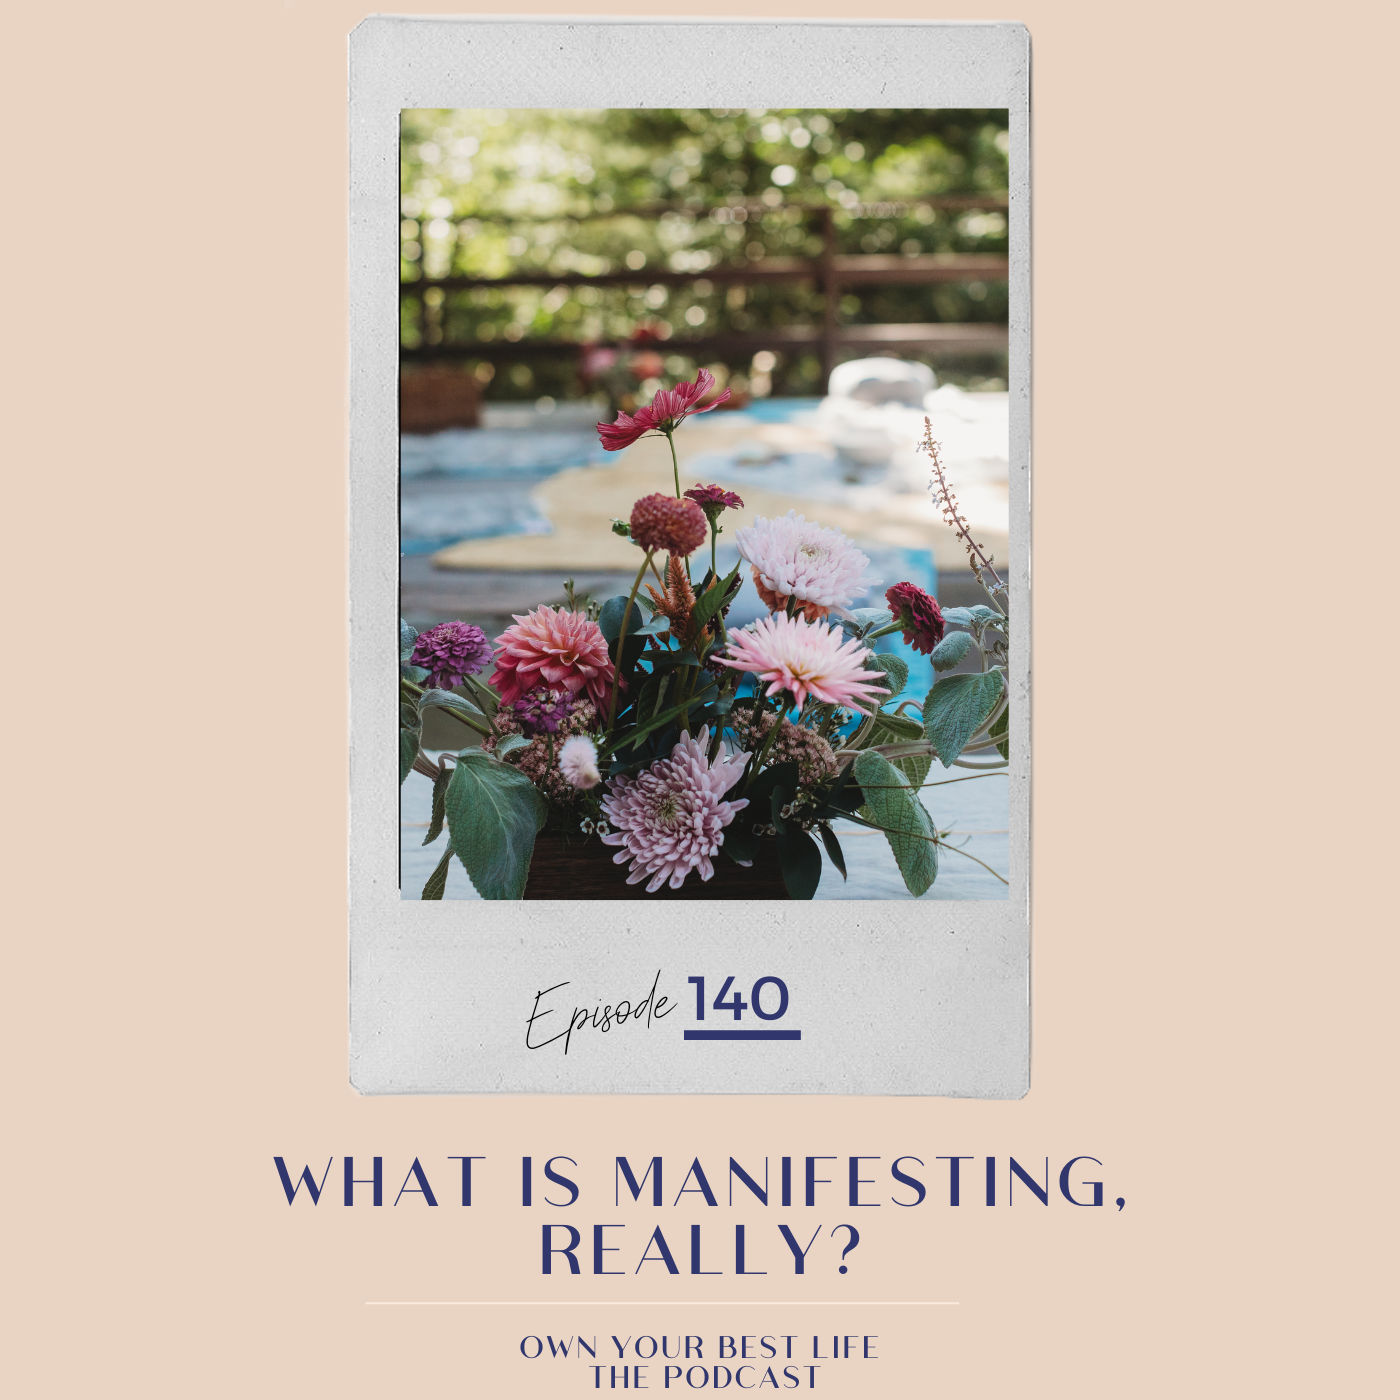 What is manifesting